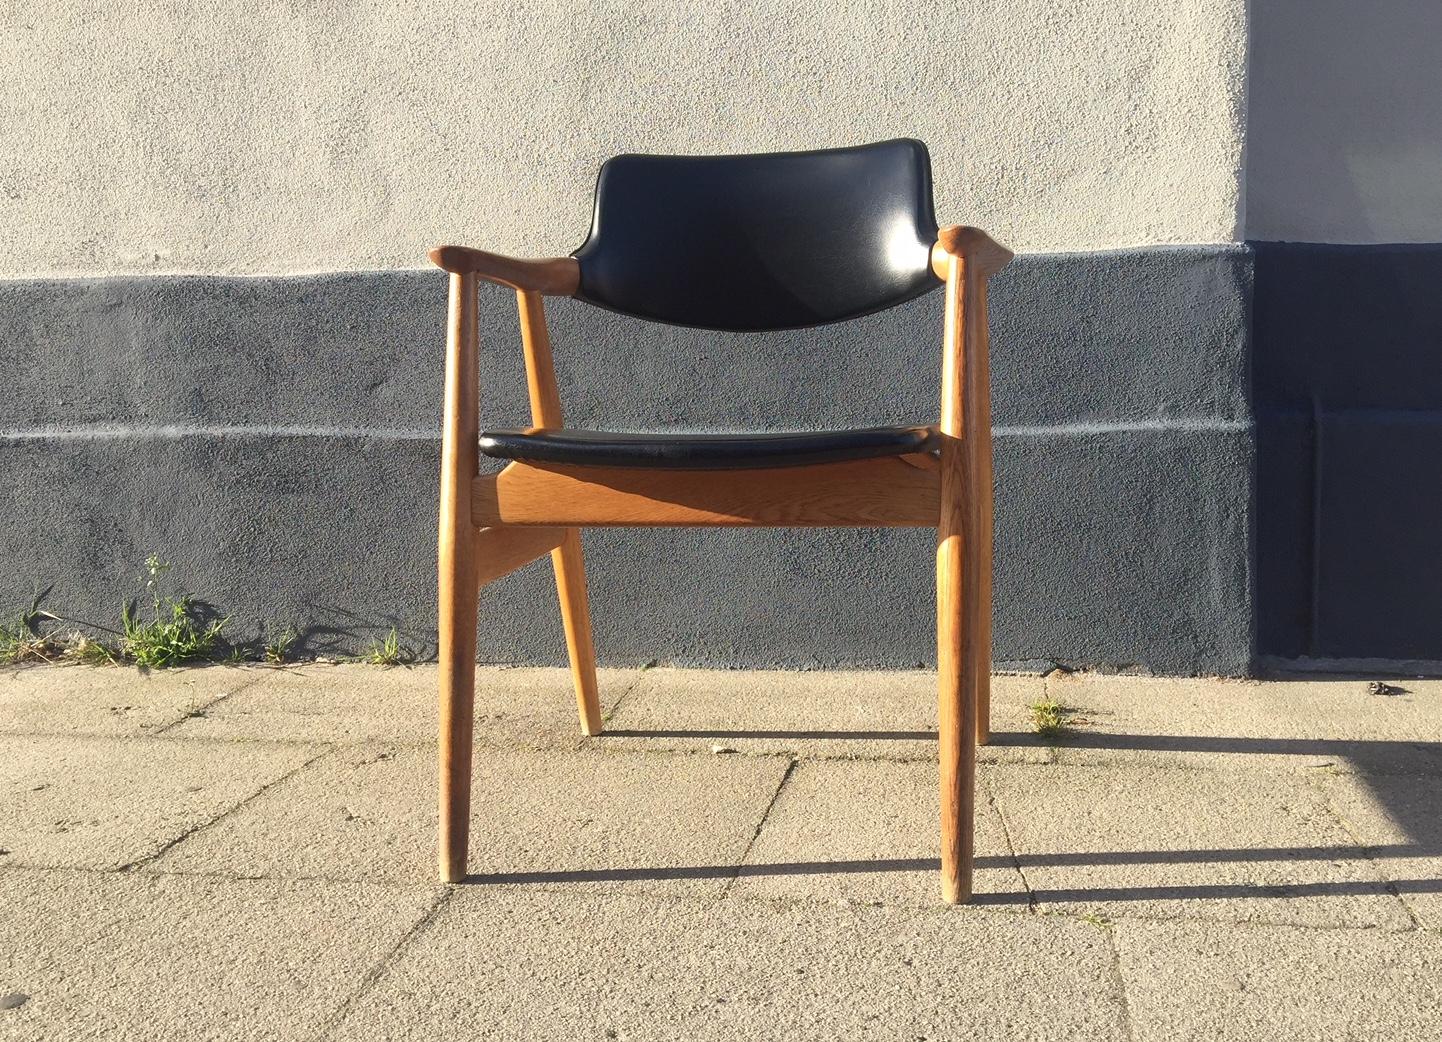 This Danish midcentury side chair with armrests was designed in 1952 by Erik Kirkegaard and manufactured in Denmark by Høng Stolefabrik in the 1960s. It features a frame in solid oak and the original black leatherette upholstery.